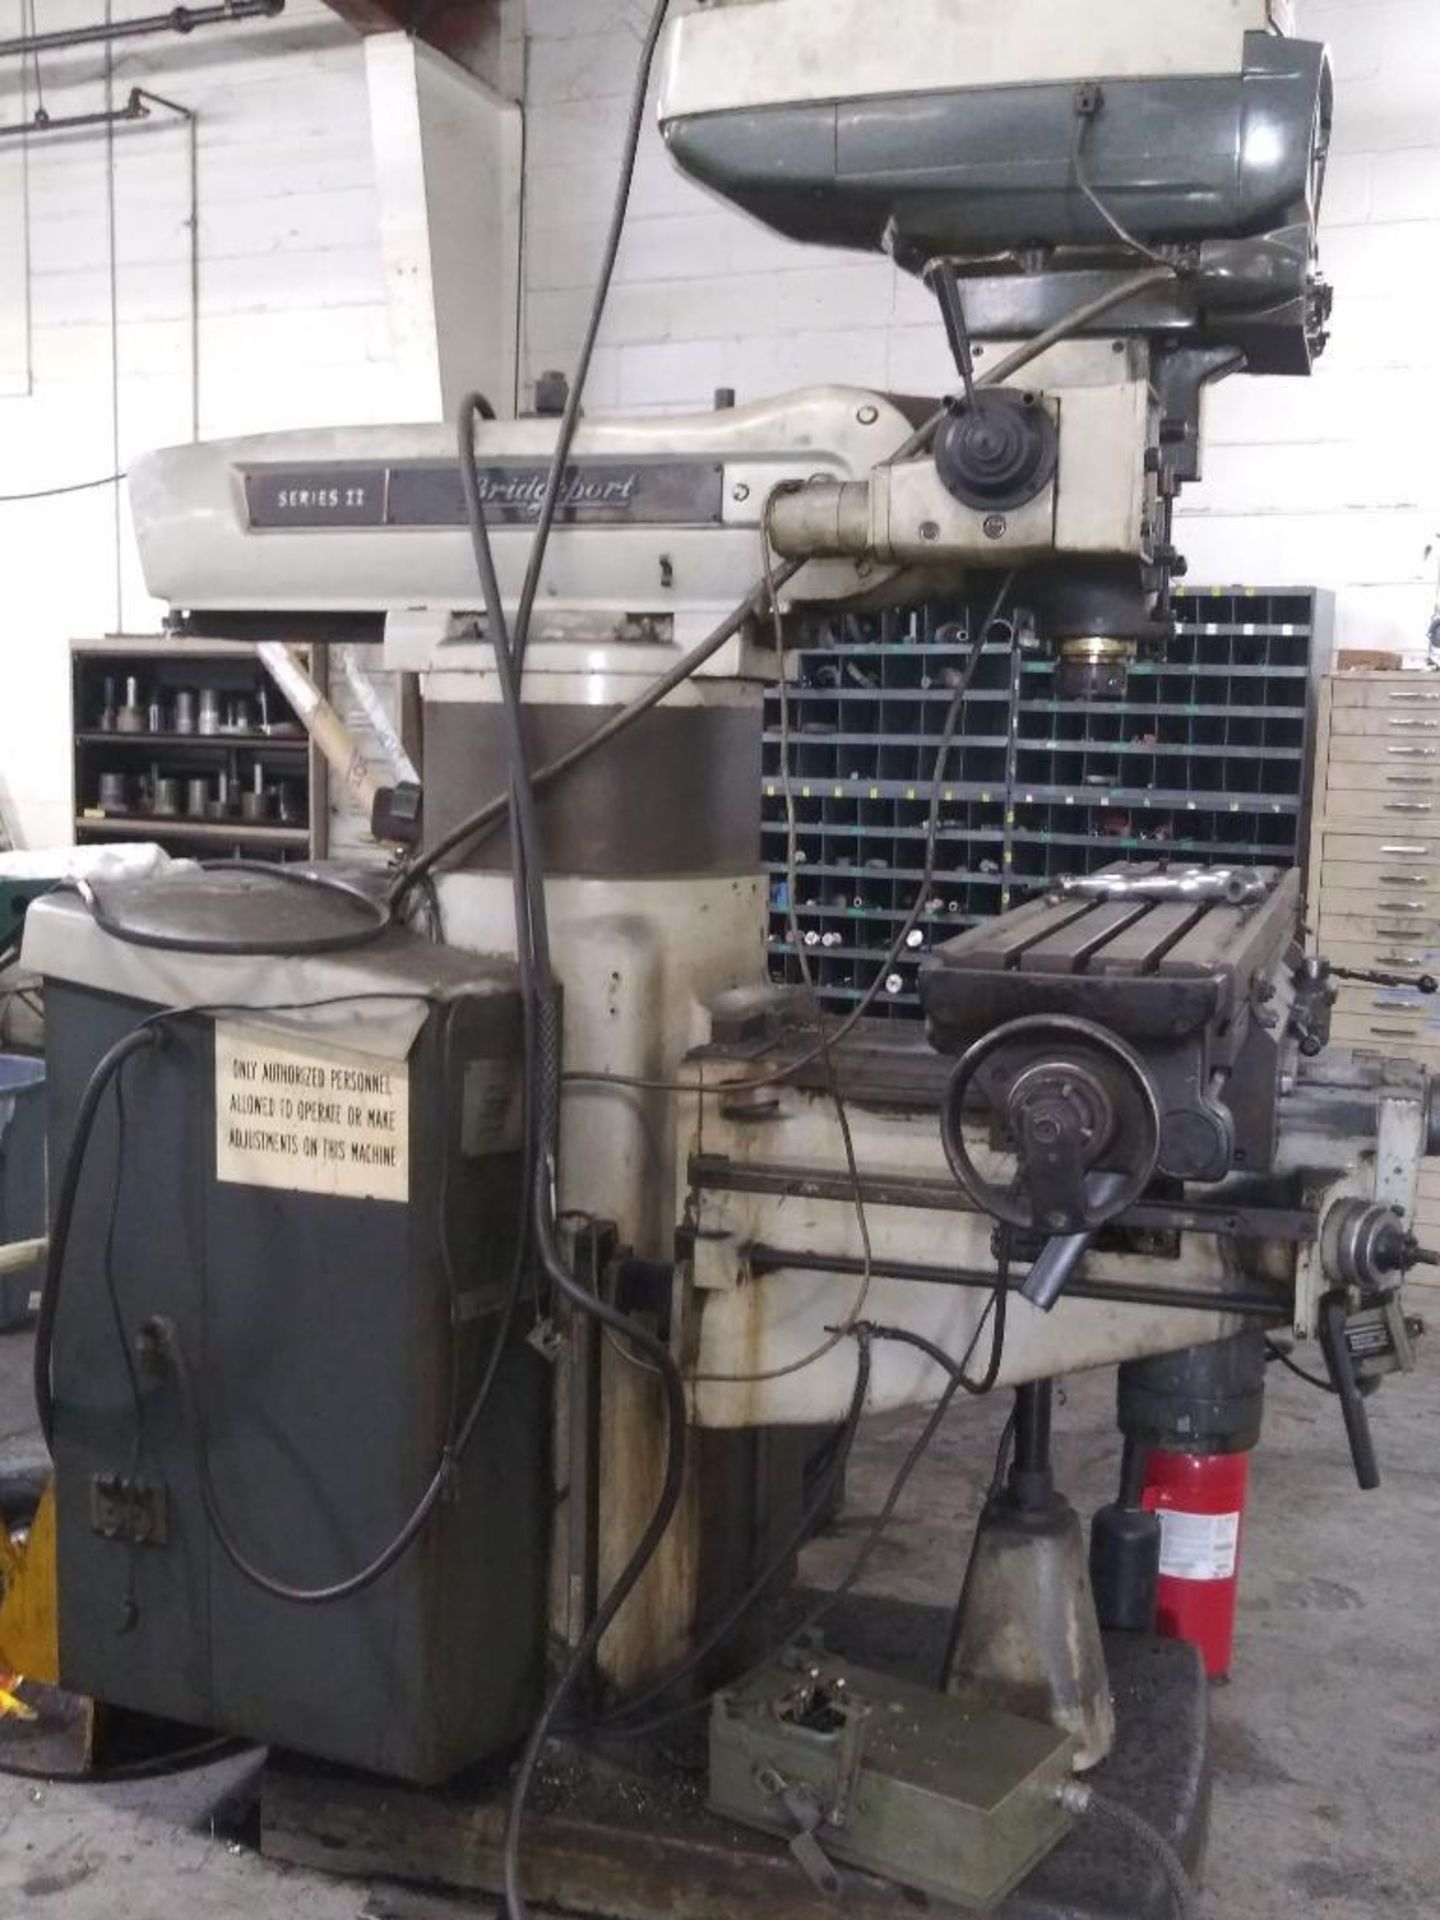 Bridgeport Series II Textron Milling Machine (Located at 2201 Hwy 31 SW, Hartselle, AL 35640) - Image 2 of 4